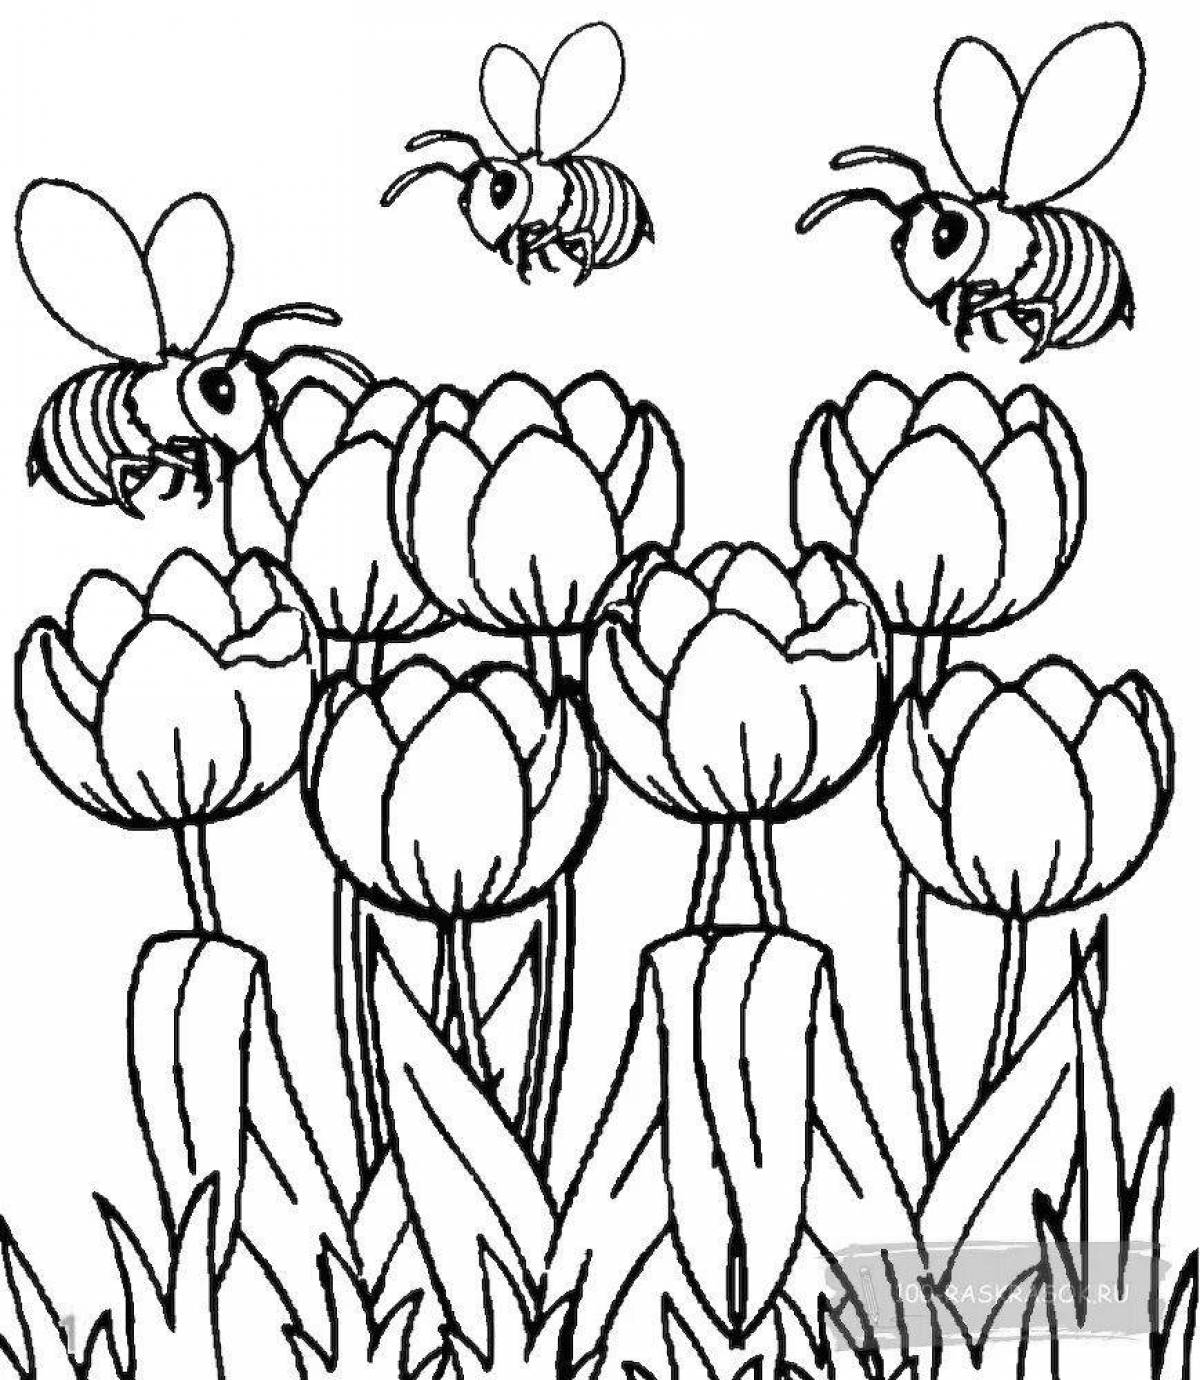 Exquisite flower coloring book for 5-6 year olds